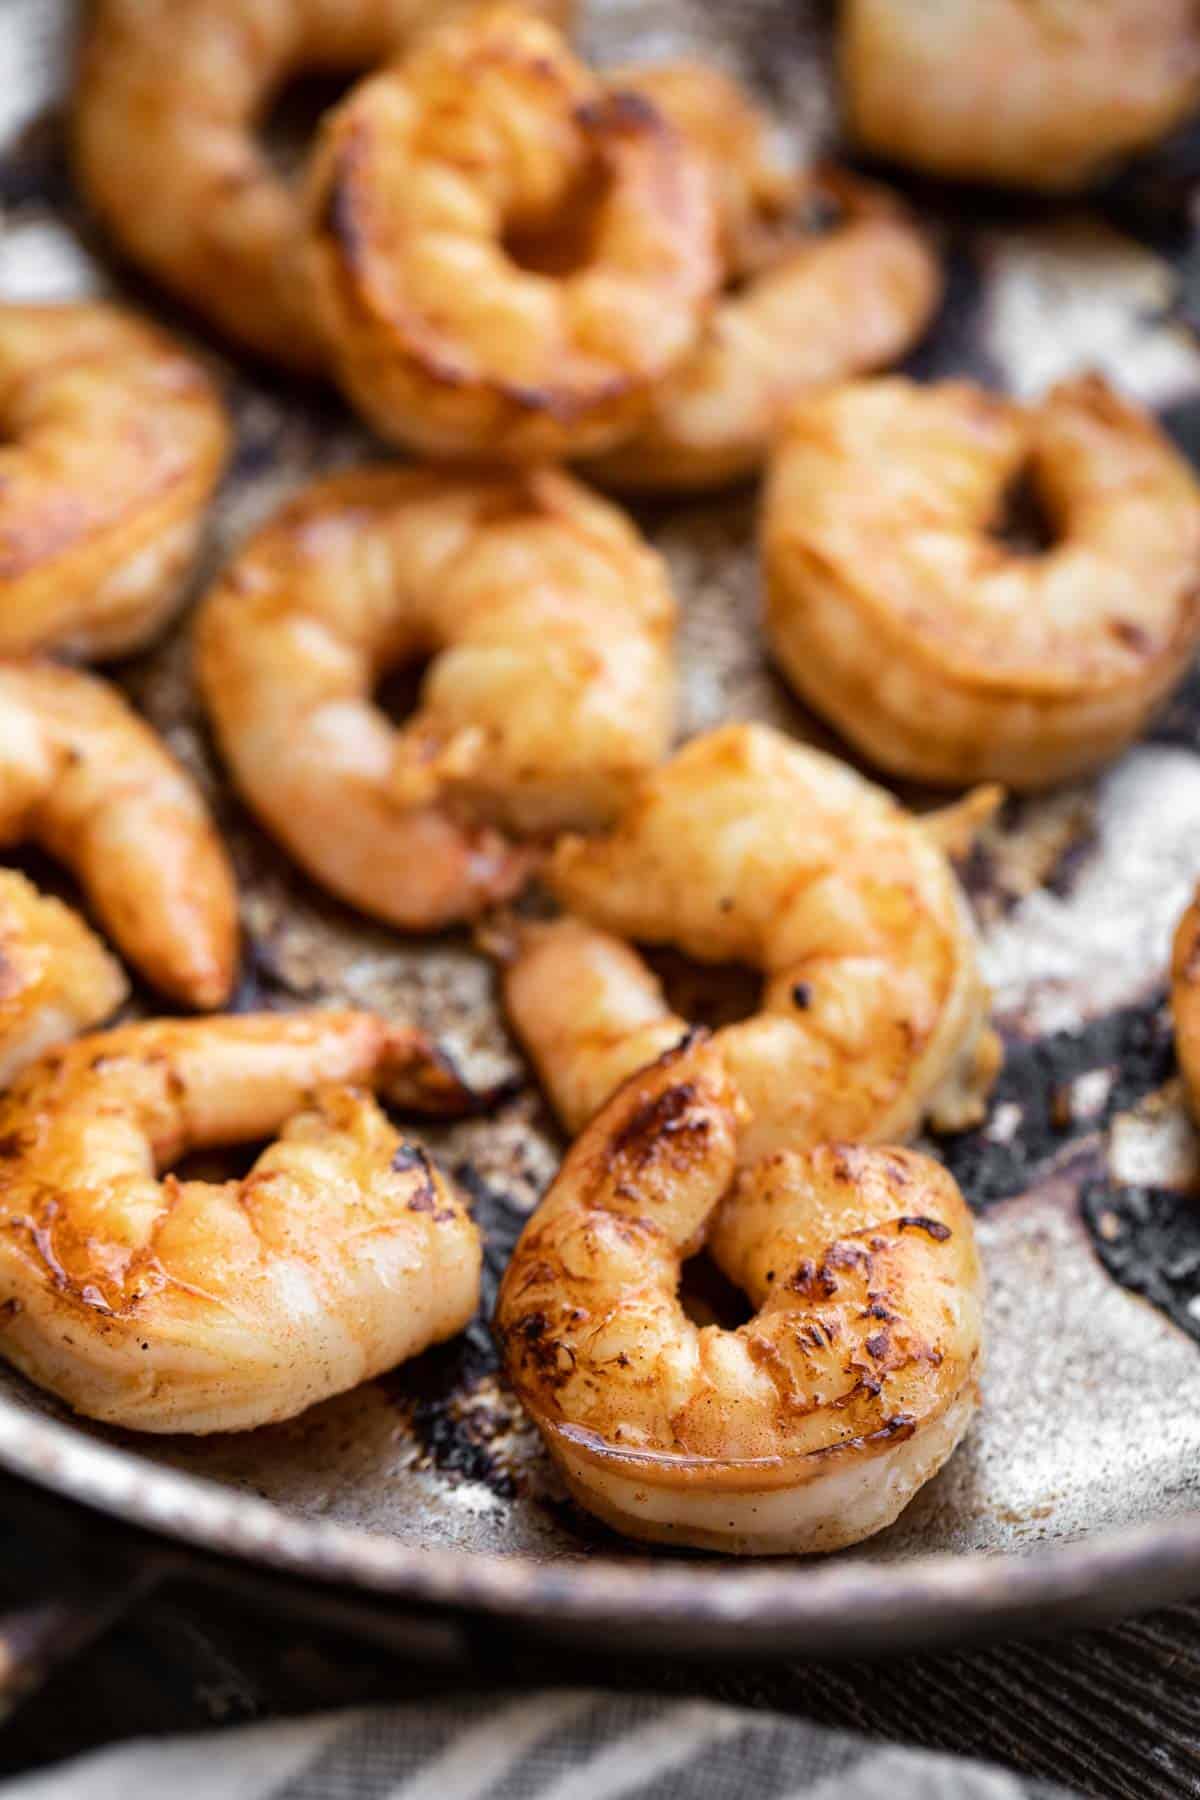 Marinated shrimp being cooked in a pan.